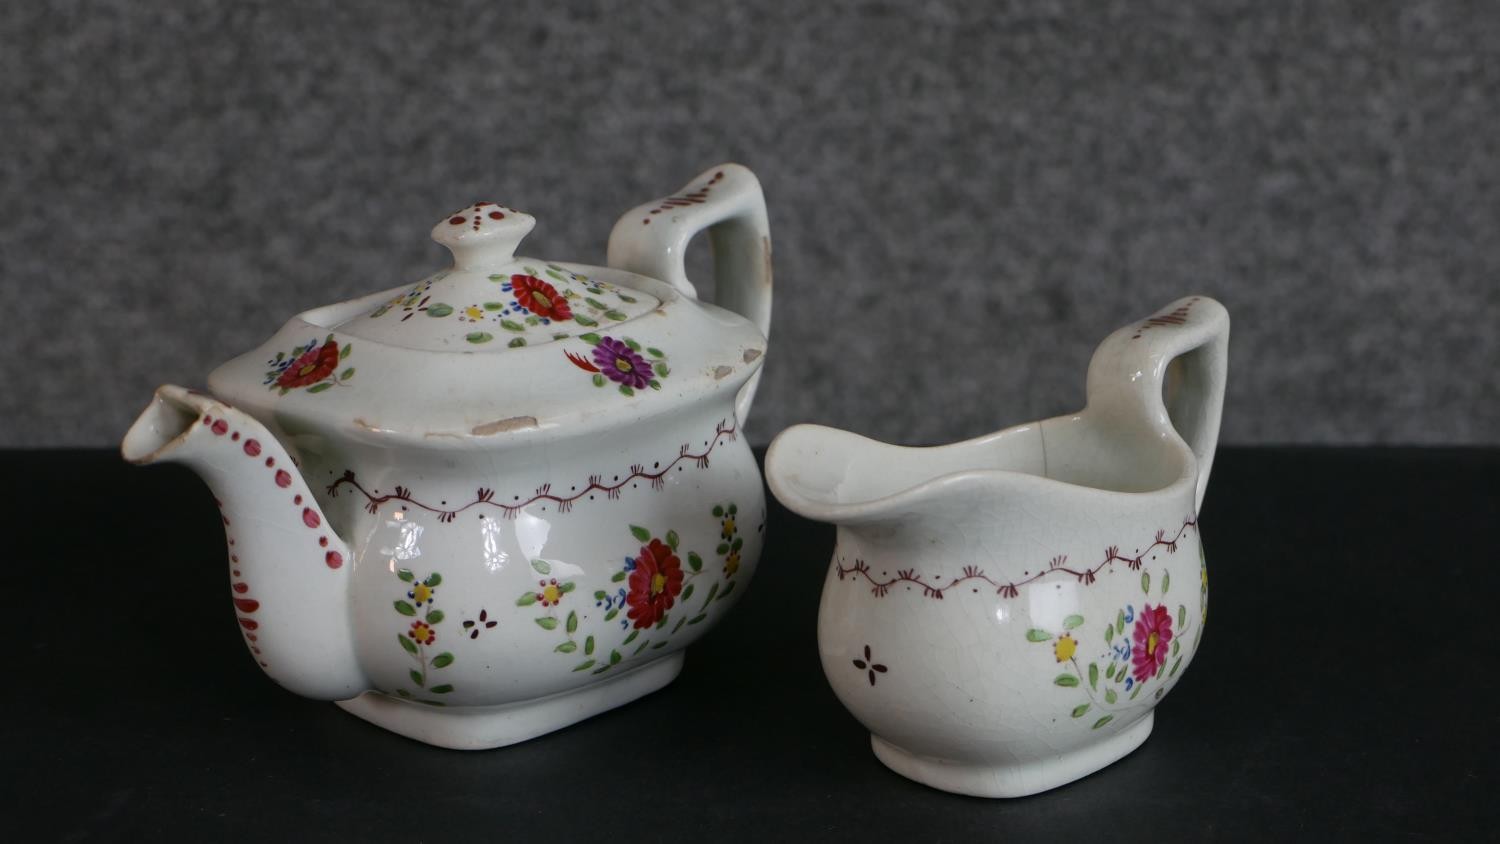 A 19th century floral design hand-painted ceramic dolls tea set for four people (one cup missing), - Image 3 of 8